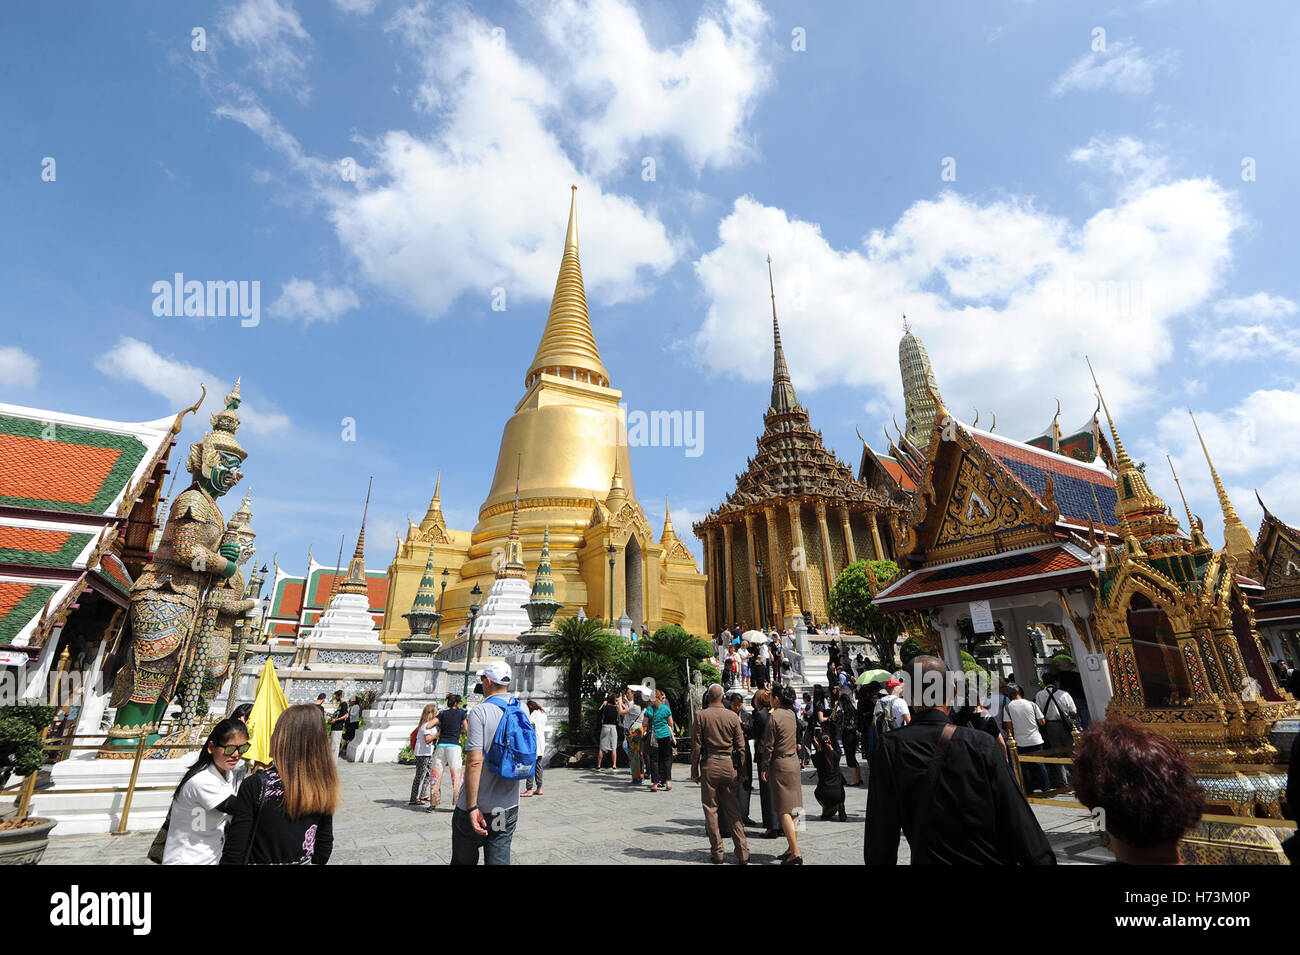 (161102) -- BANGKOK, Nov. 2, 2016 (Xinhua) -- Tourists visit Wat Phra Kaew temple inside the Grand Palace, in Bangkok, Thailand, Nov. 2, 2016. Wat Phra Kaew temple reopened on Tuesday for tourists for the first time since the suspension of ticket distribution on Oct. 14, after Thai King Bhumibol Adulyadej passed away. (Xinhua/Rachen Sageamsak) (sxk) Stock Photo